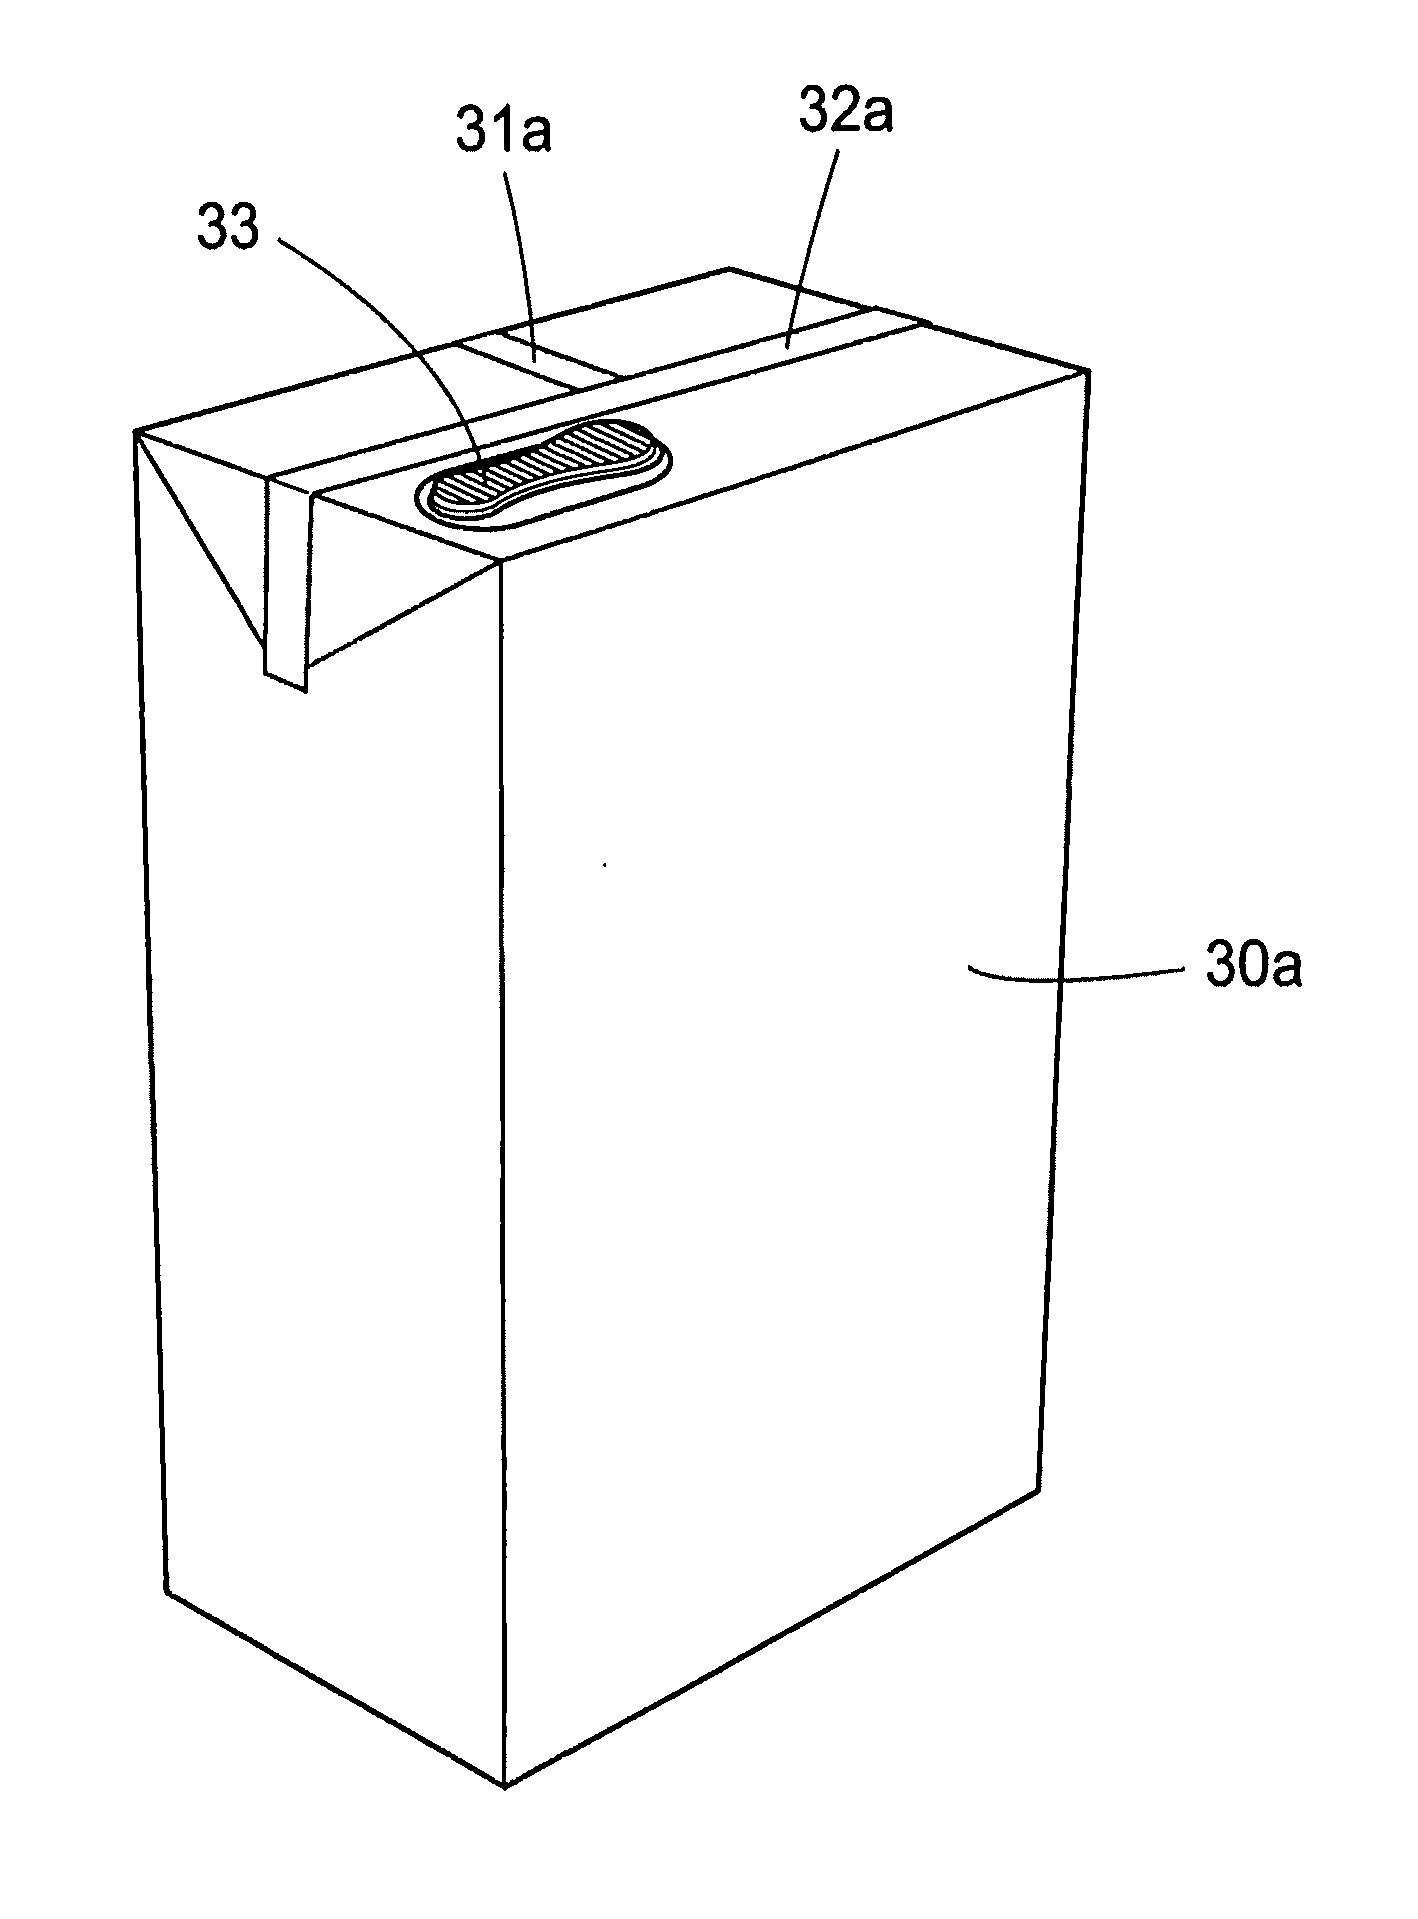 Packaging laminate, method for manufacturing of the packaging laminate and packaging container produced therefrom